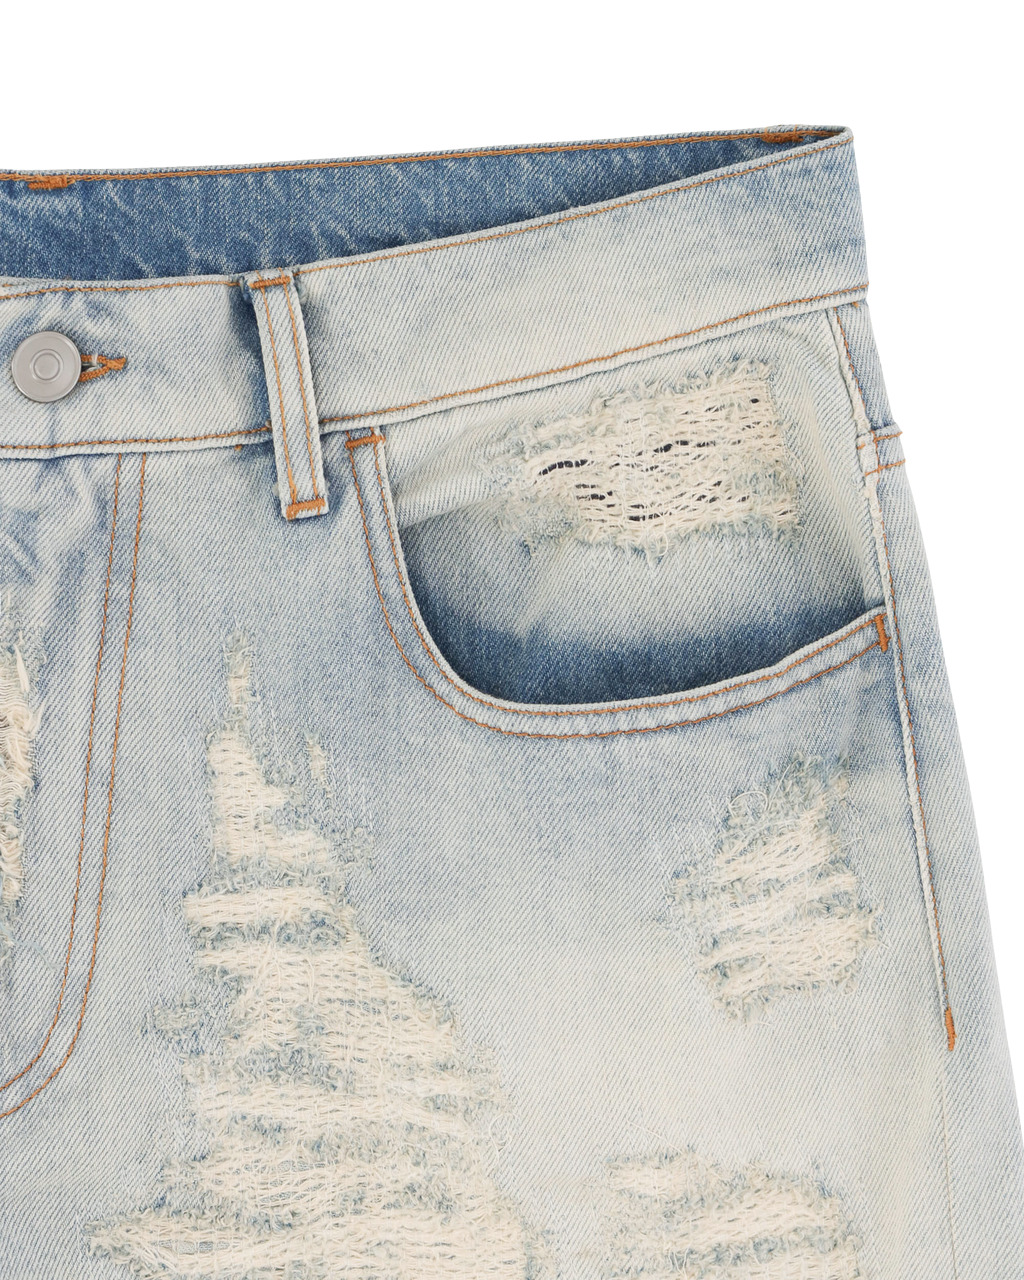 DESTROYED EMBROIDERY JEAN - 10